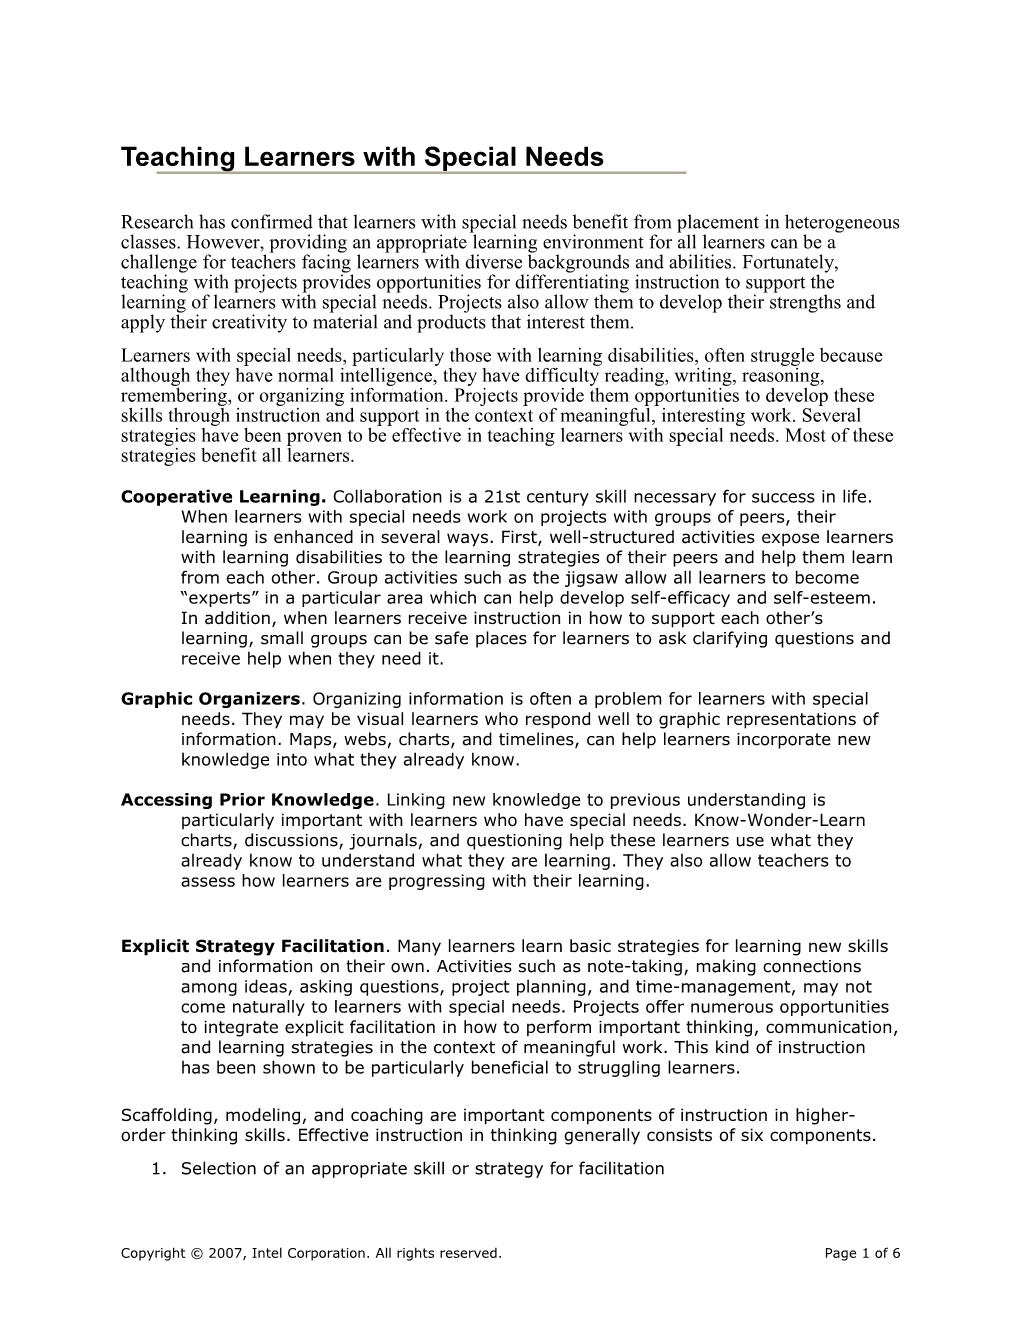 Teaching Learners With Special Needs